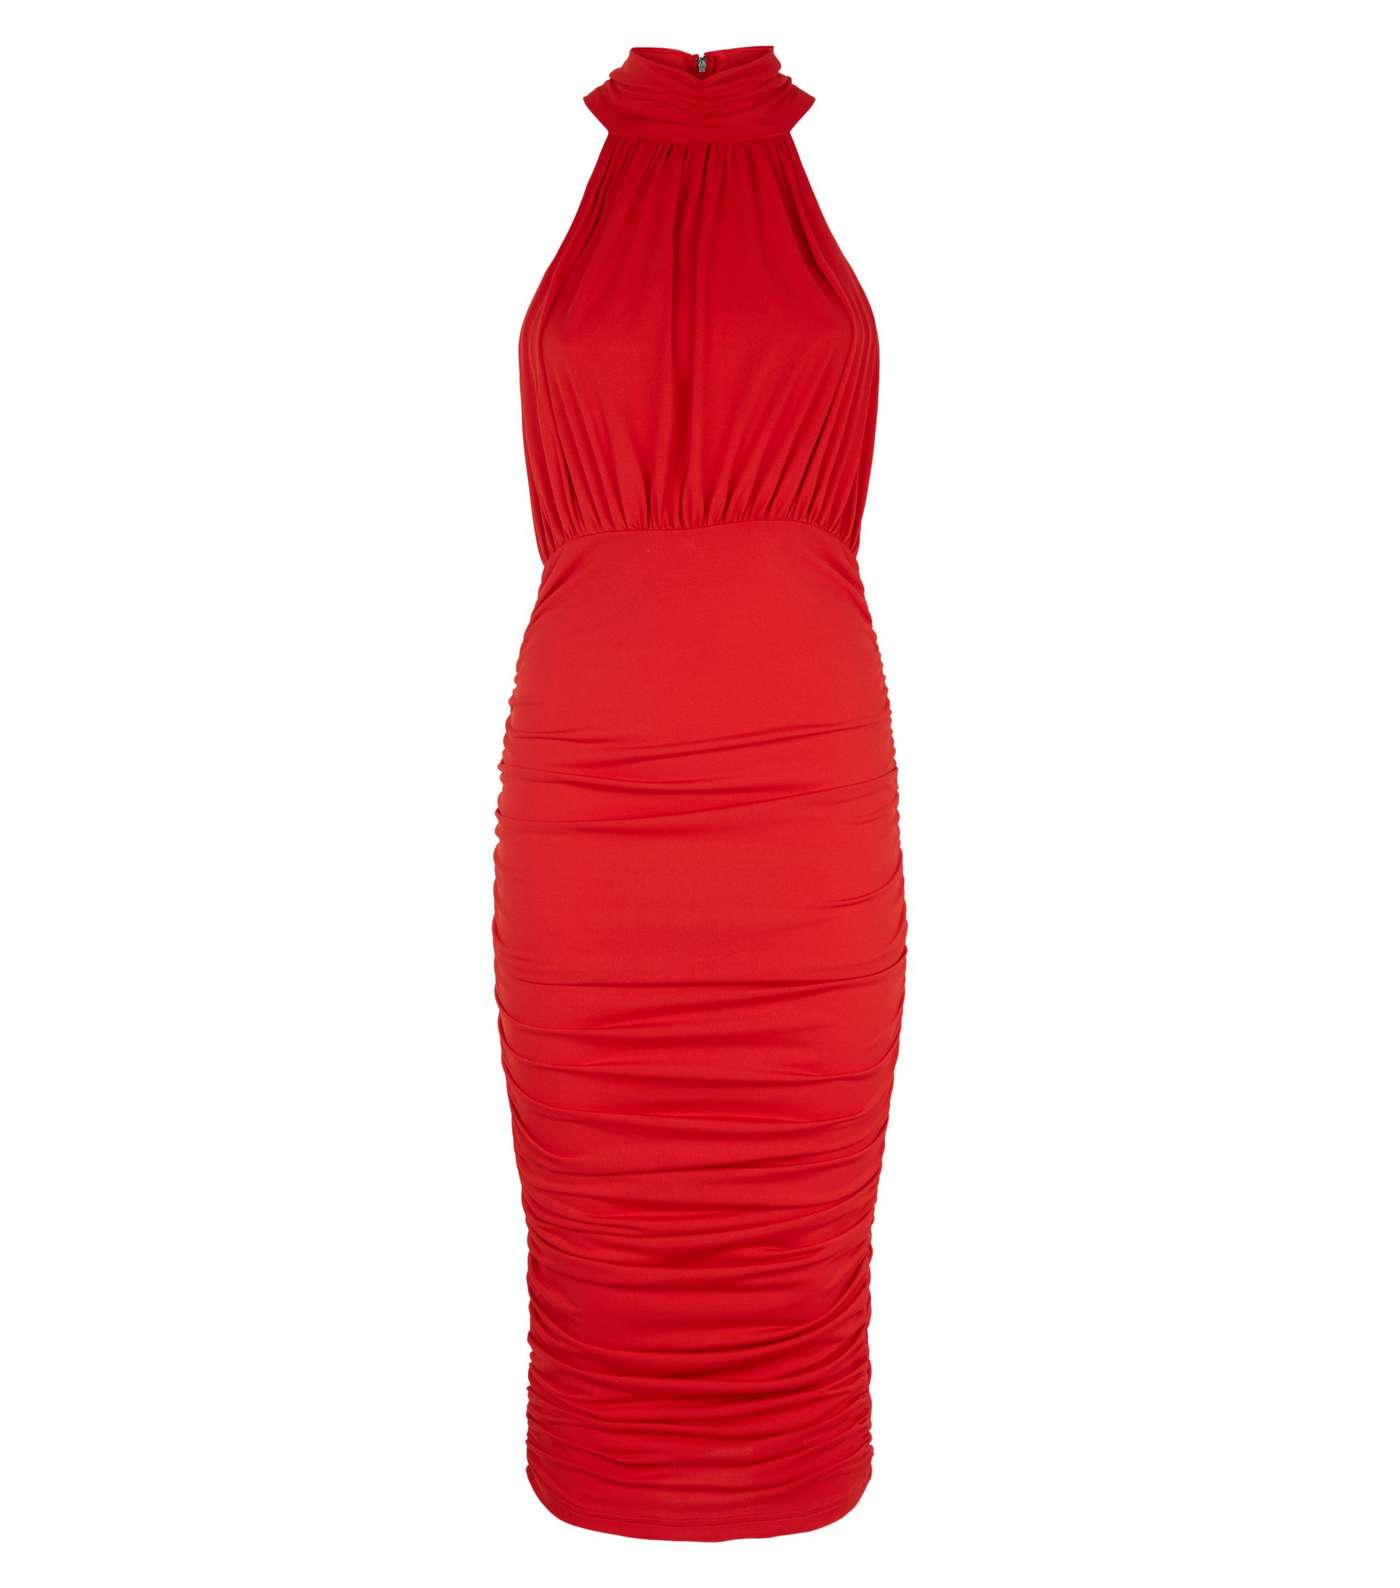 AX Paris Red Ruched High Neck Dress Image 4